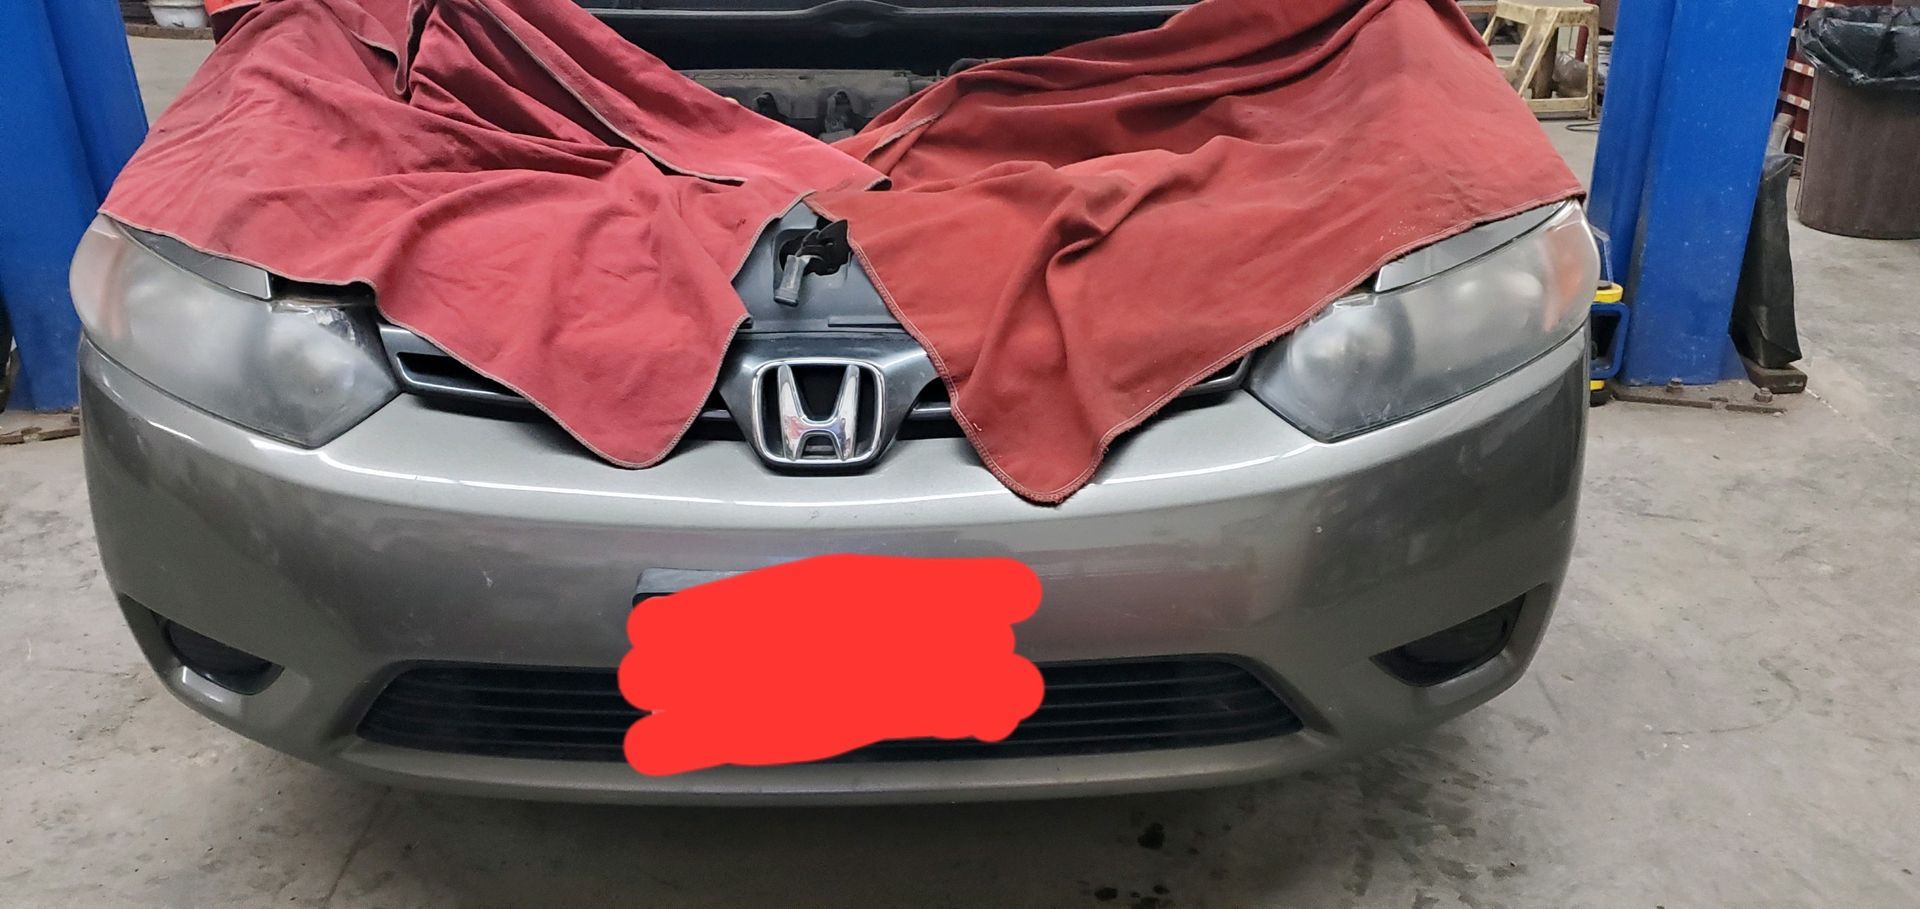 a silver honda car with a red towel on the hood